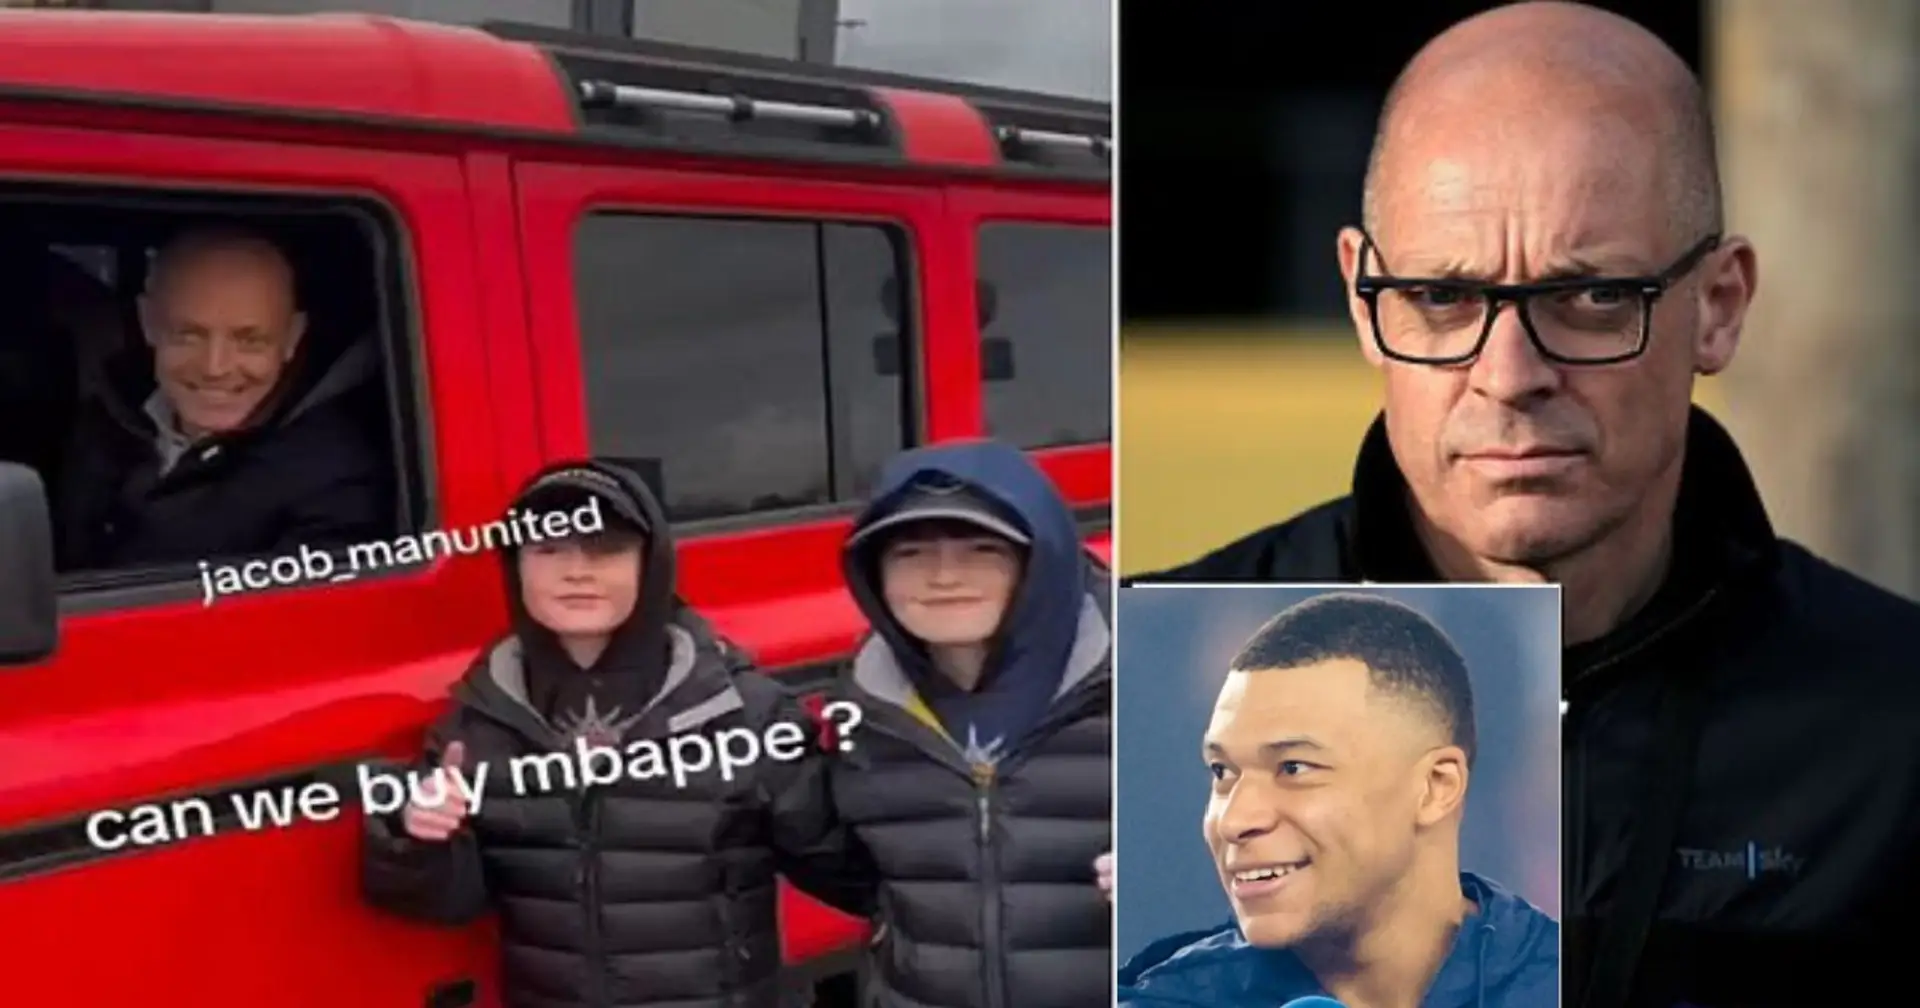 Are Man United really interested in Mbappe? Brailsford answers